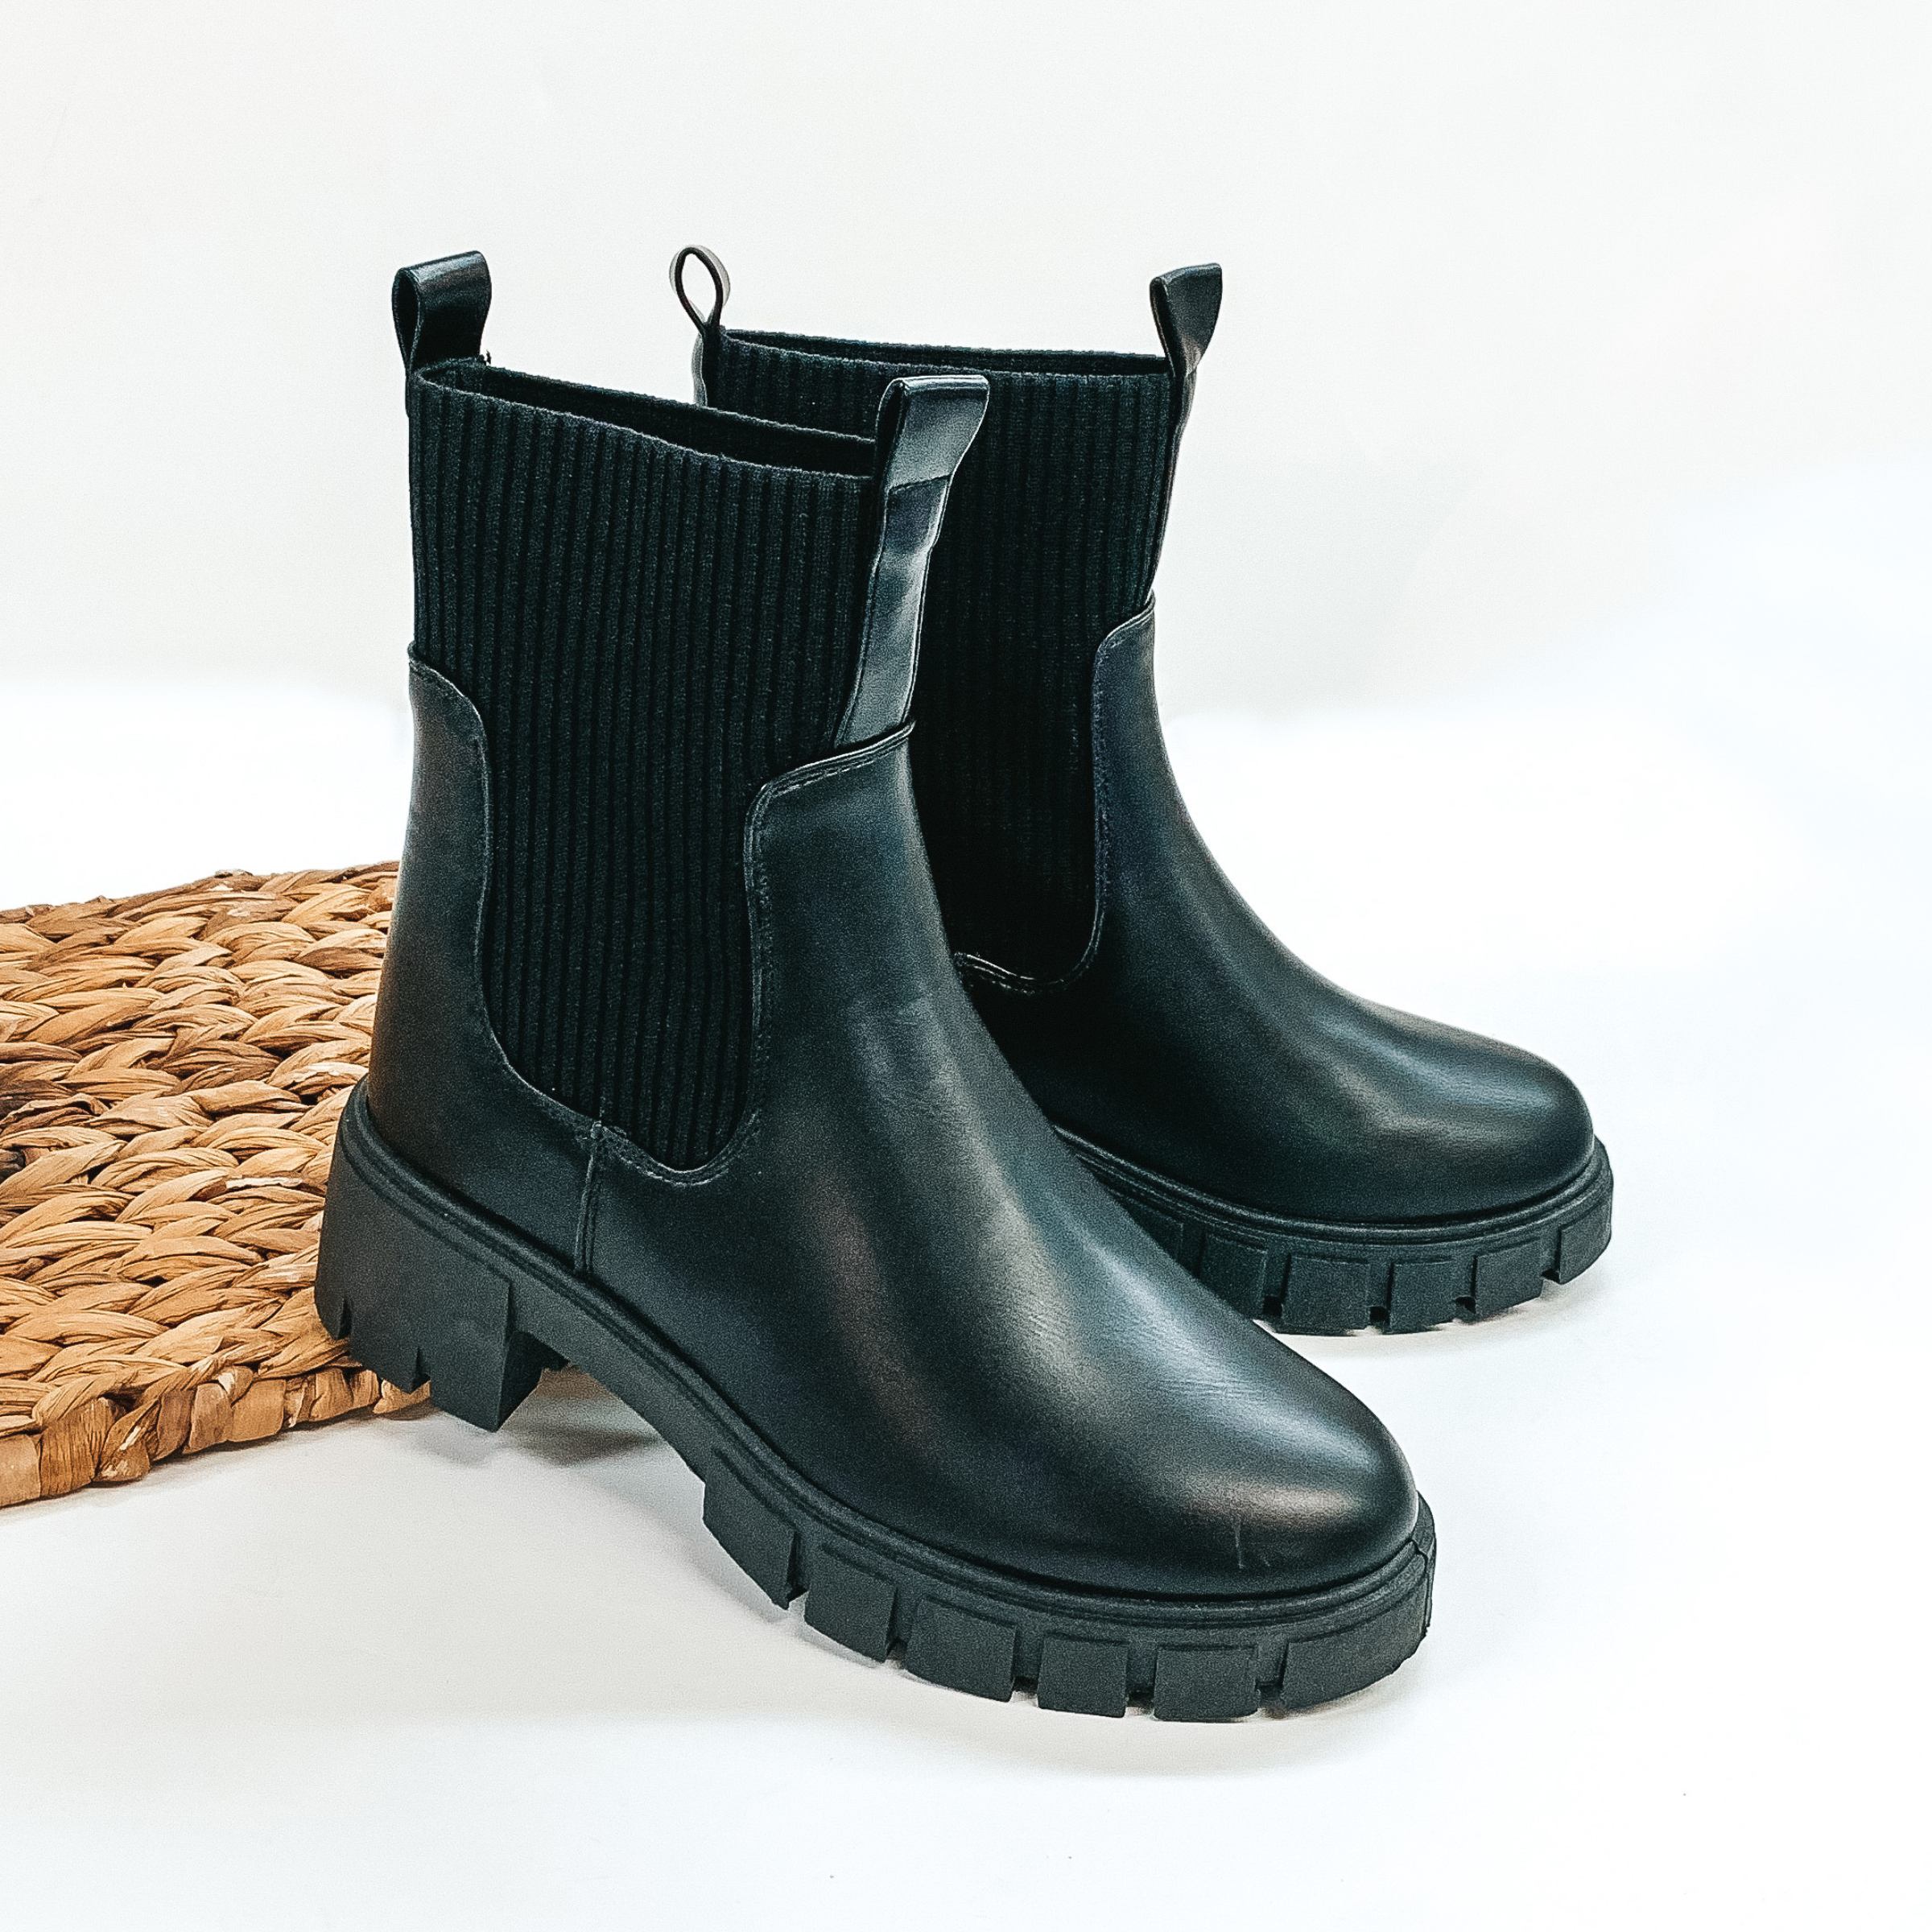 Ankle high black colored slip on bootie. The sides are elastic and also have a front and back pull on tab. These booties are pictured propped on a basket weave material on a white background. 